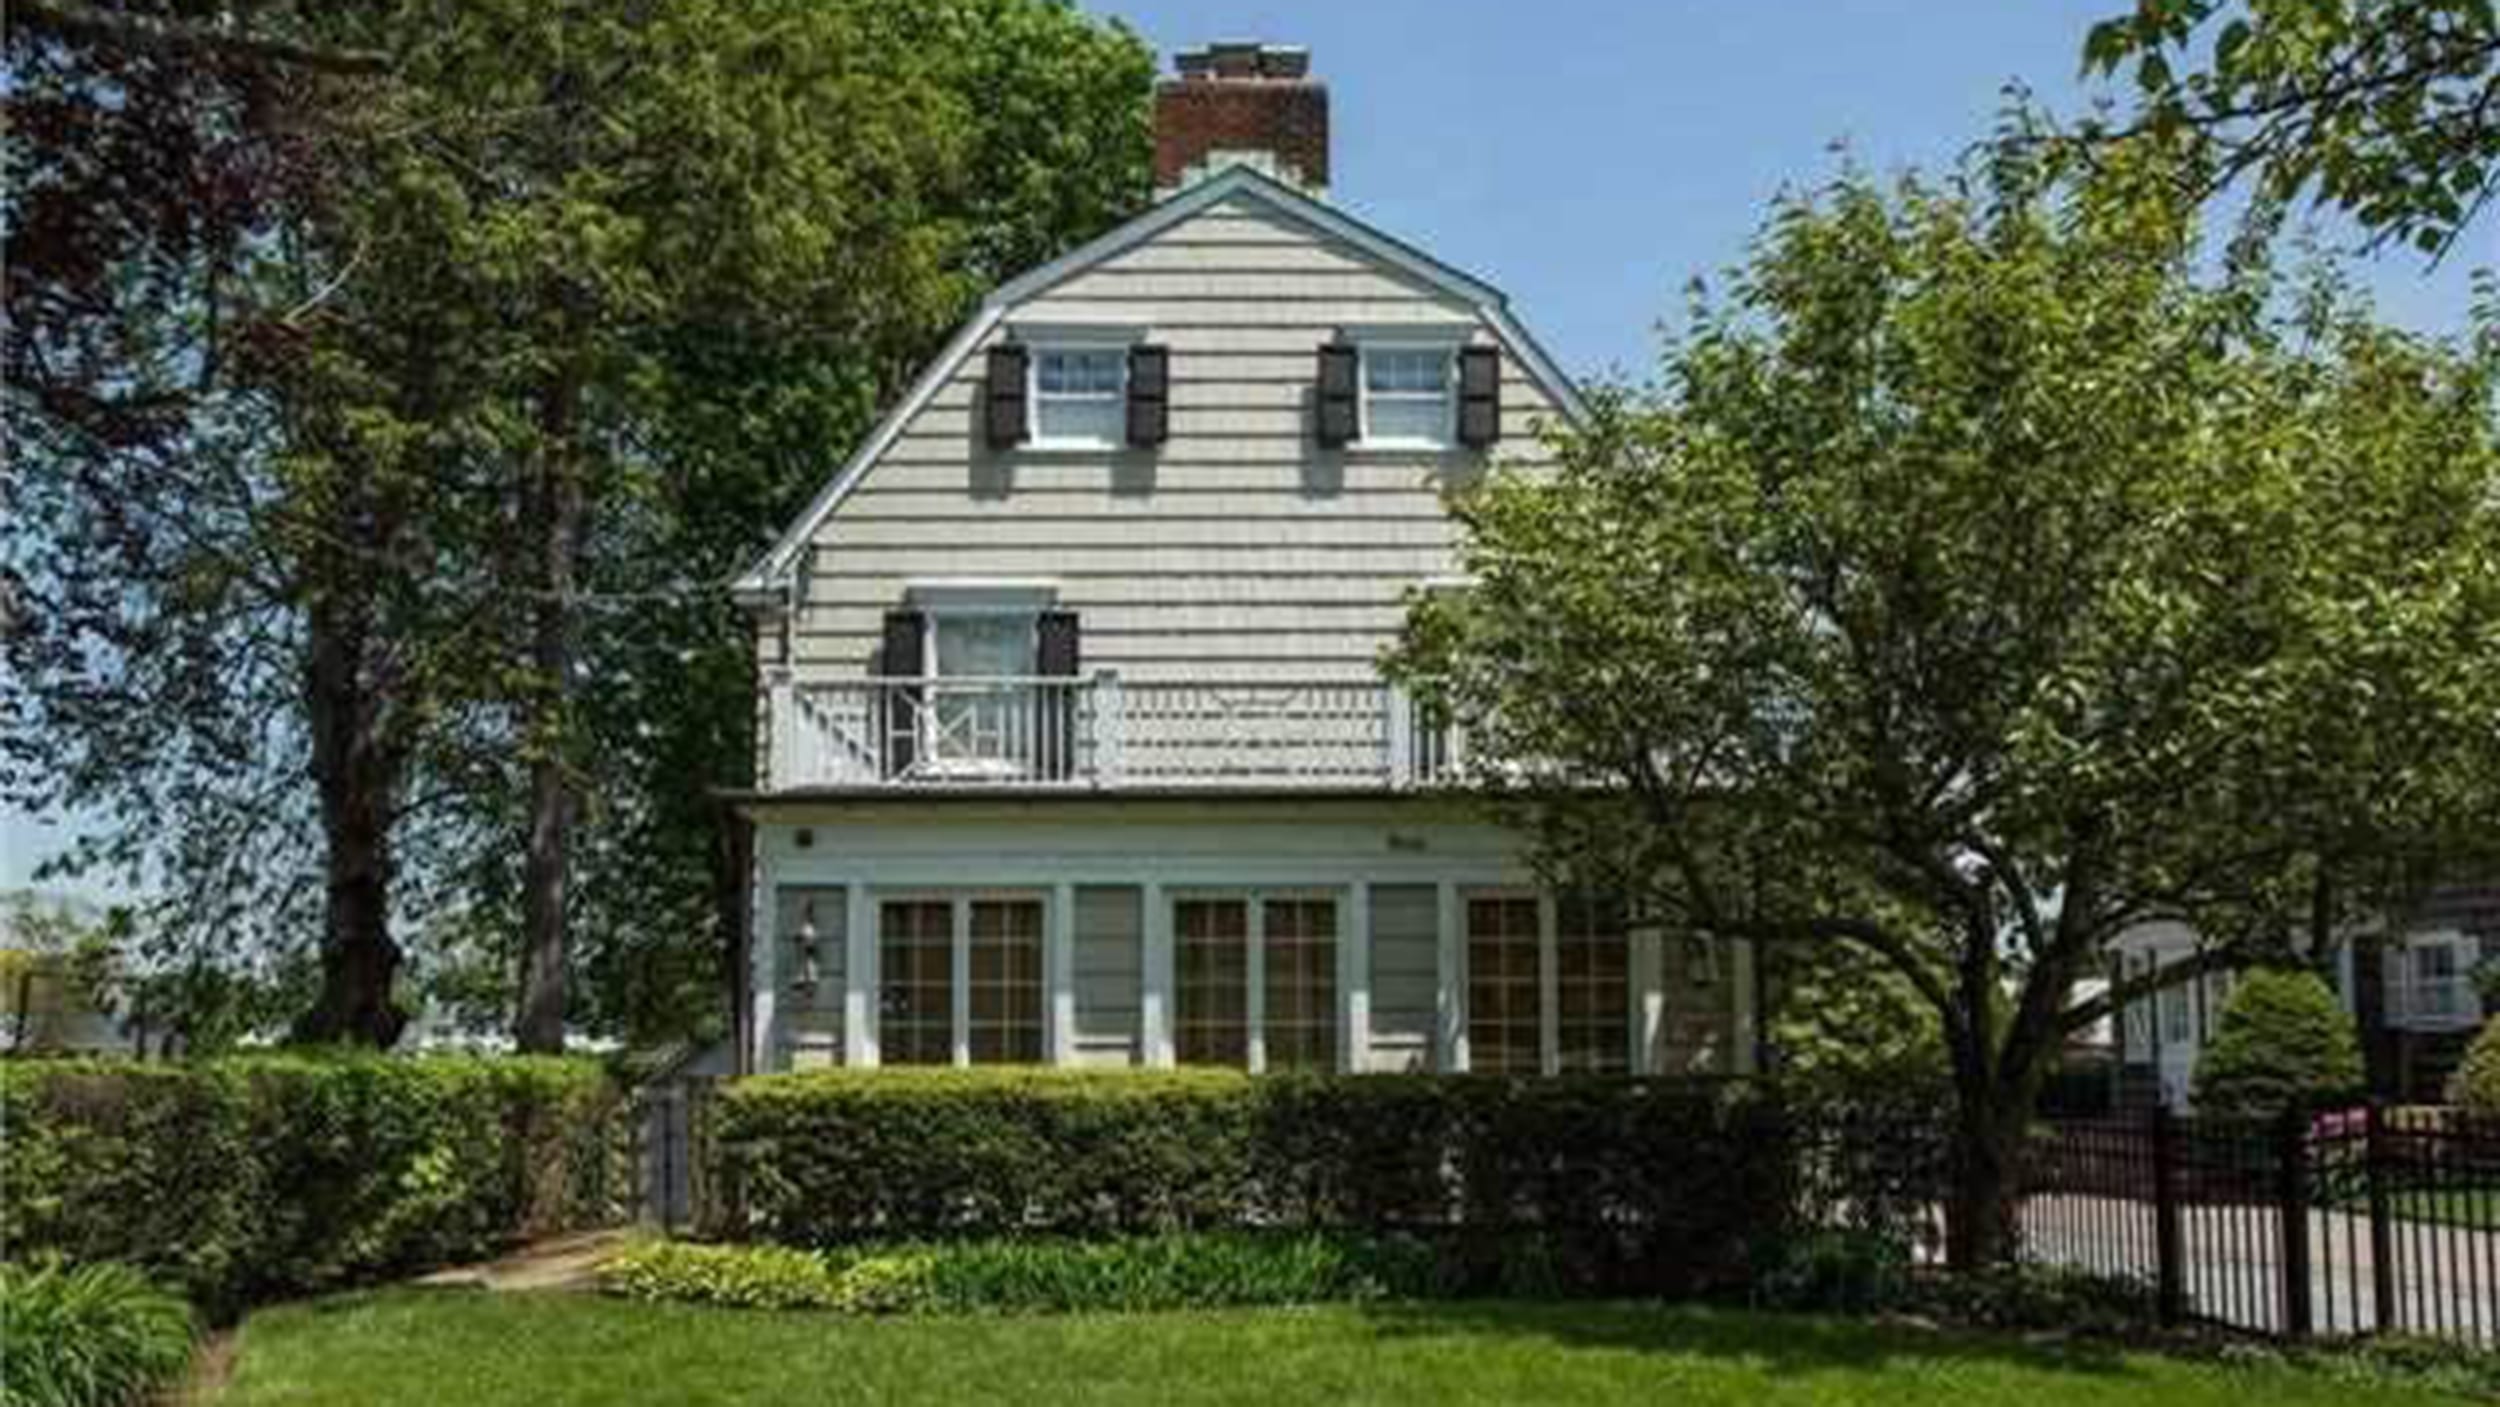 Amityville Horror House – The Scene Of The 1974 DeFeo Murders